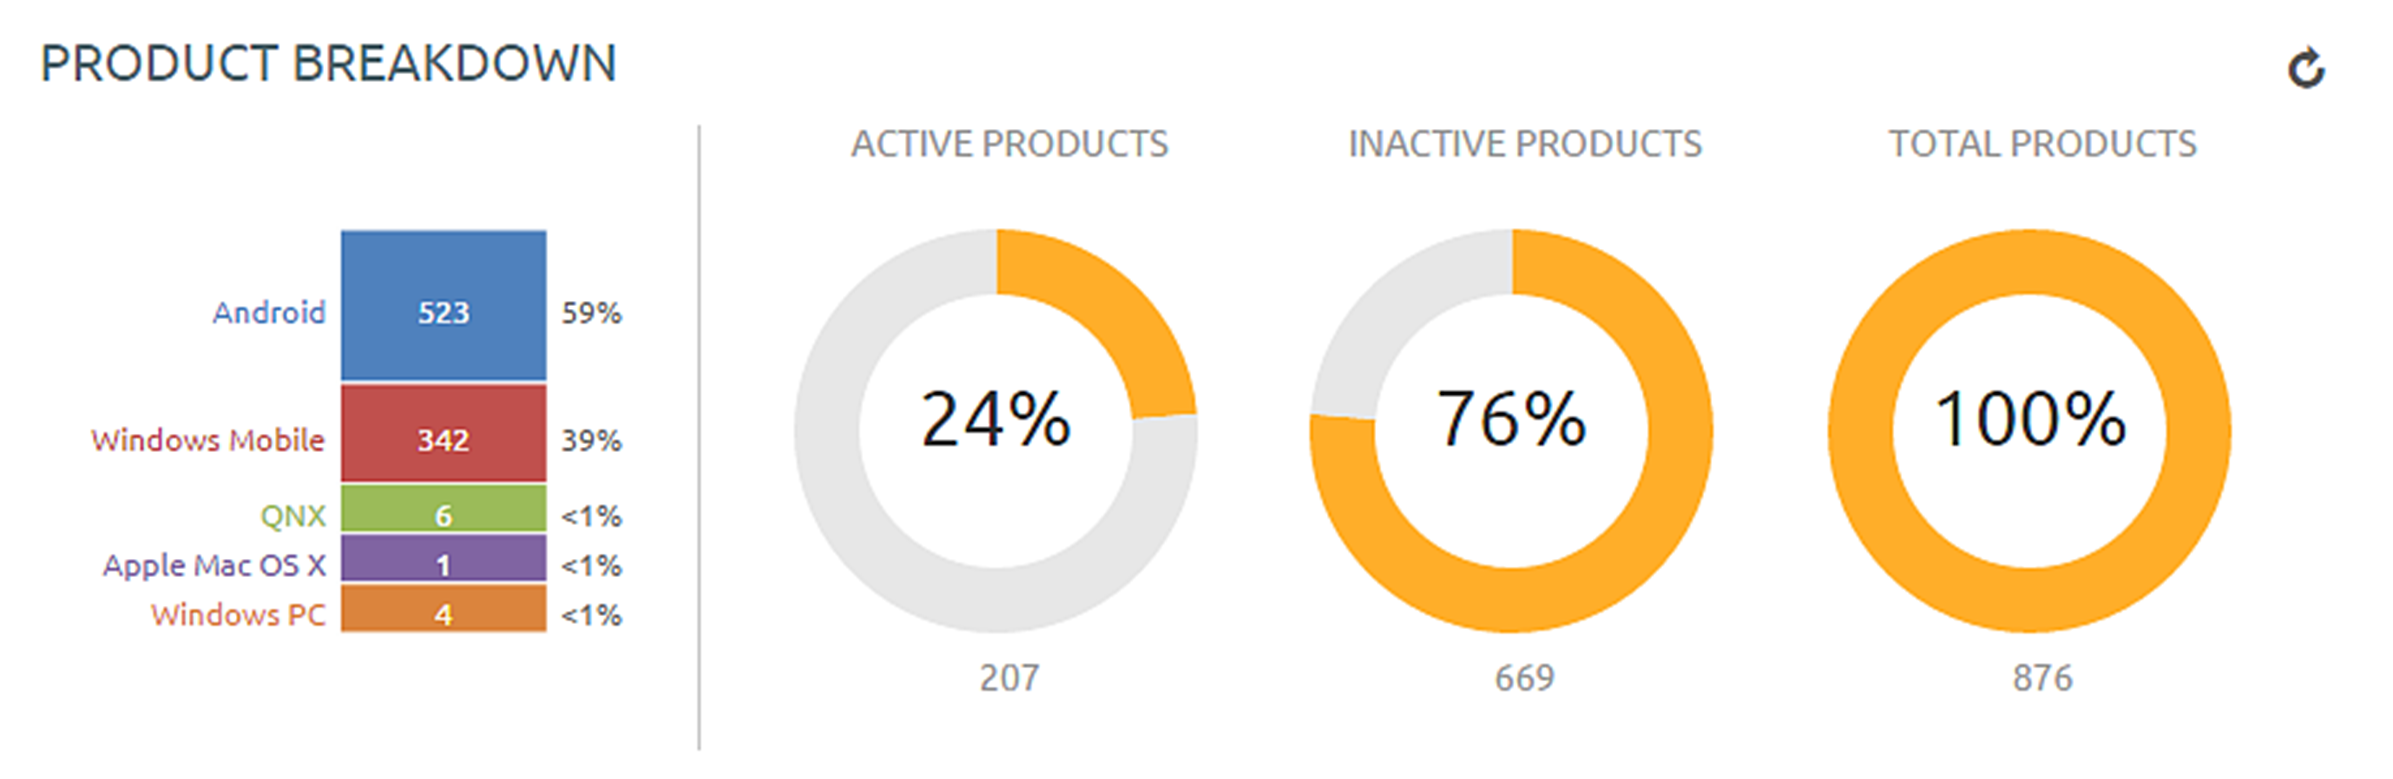 This partial screenshot shows the product breakdown across two different kinds of graphs: a classic bar graph and a donut graph showing active and inactive products.